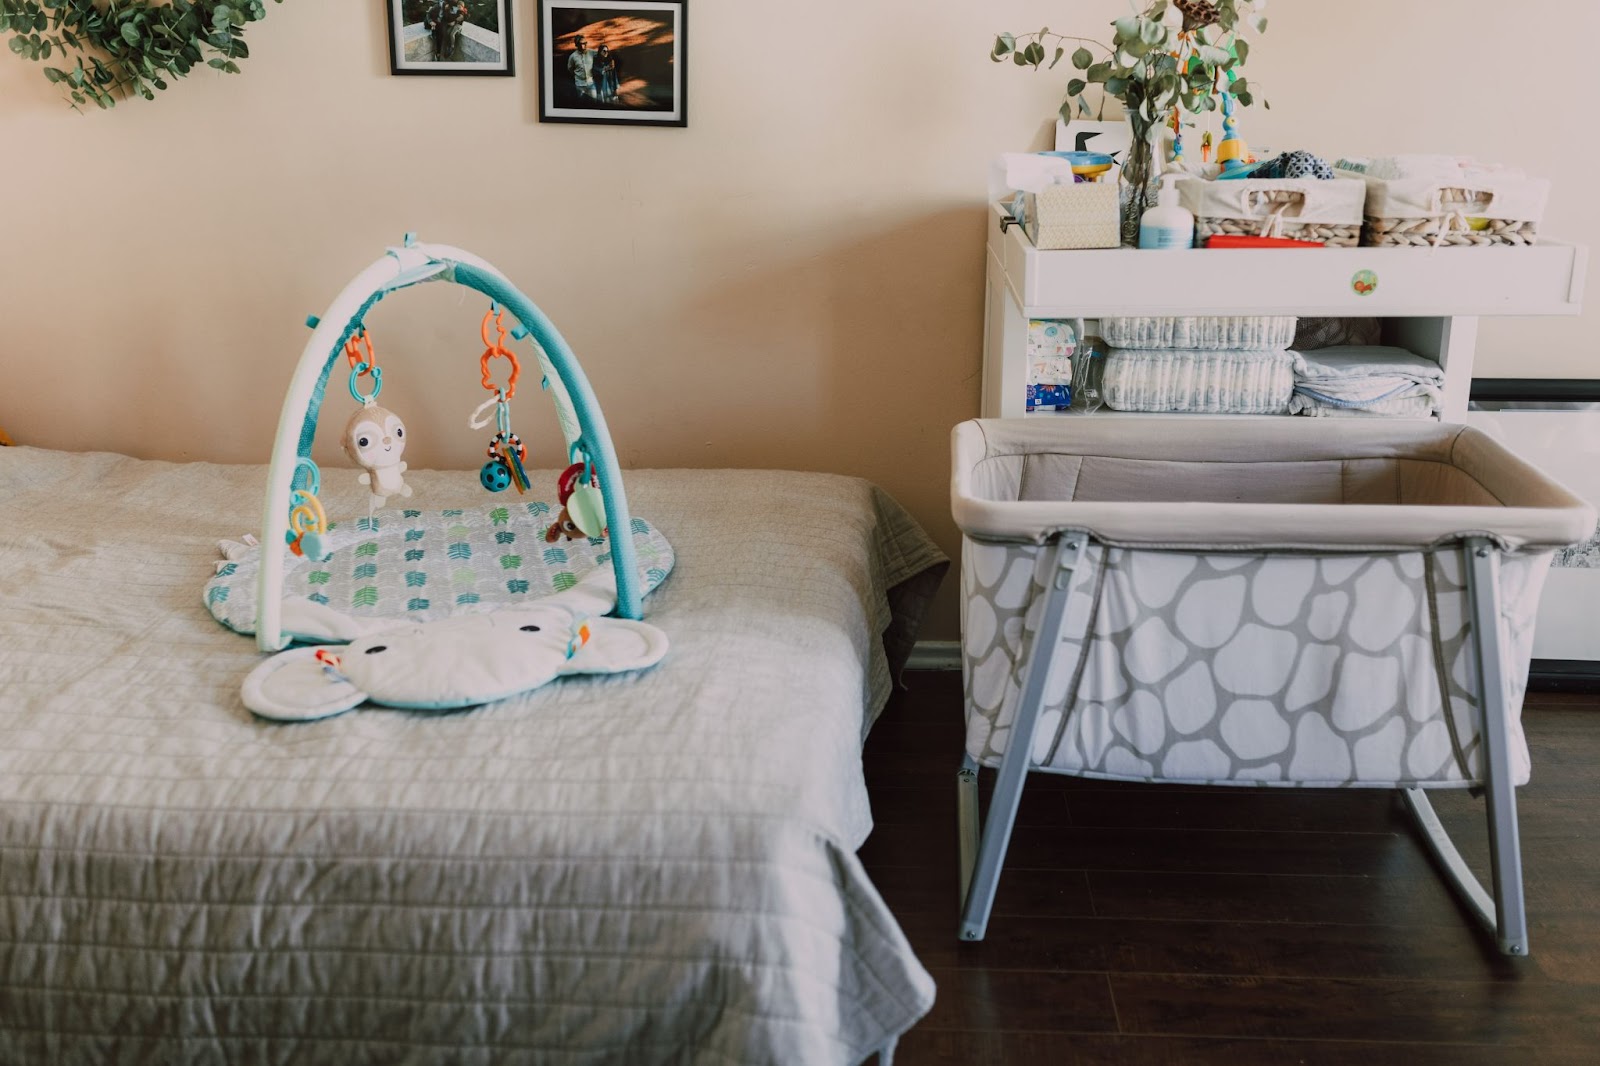 Baby room -Toddler bedroom ideas featured image - Baby Journey